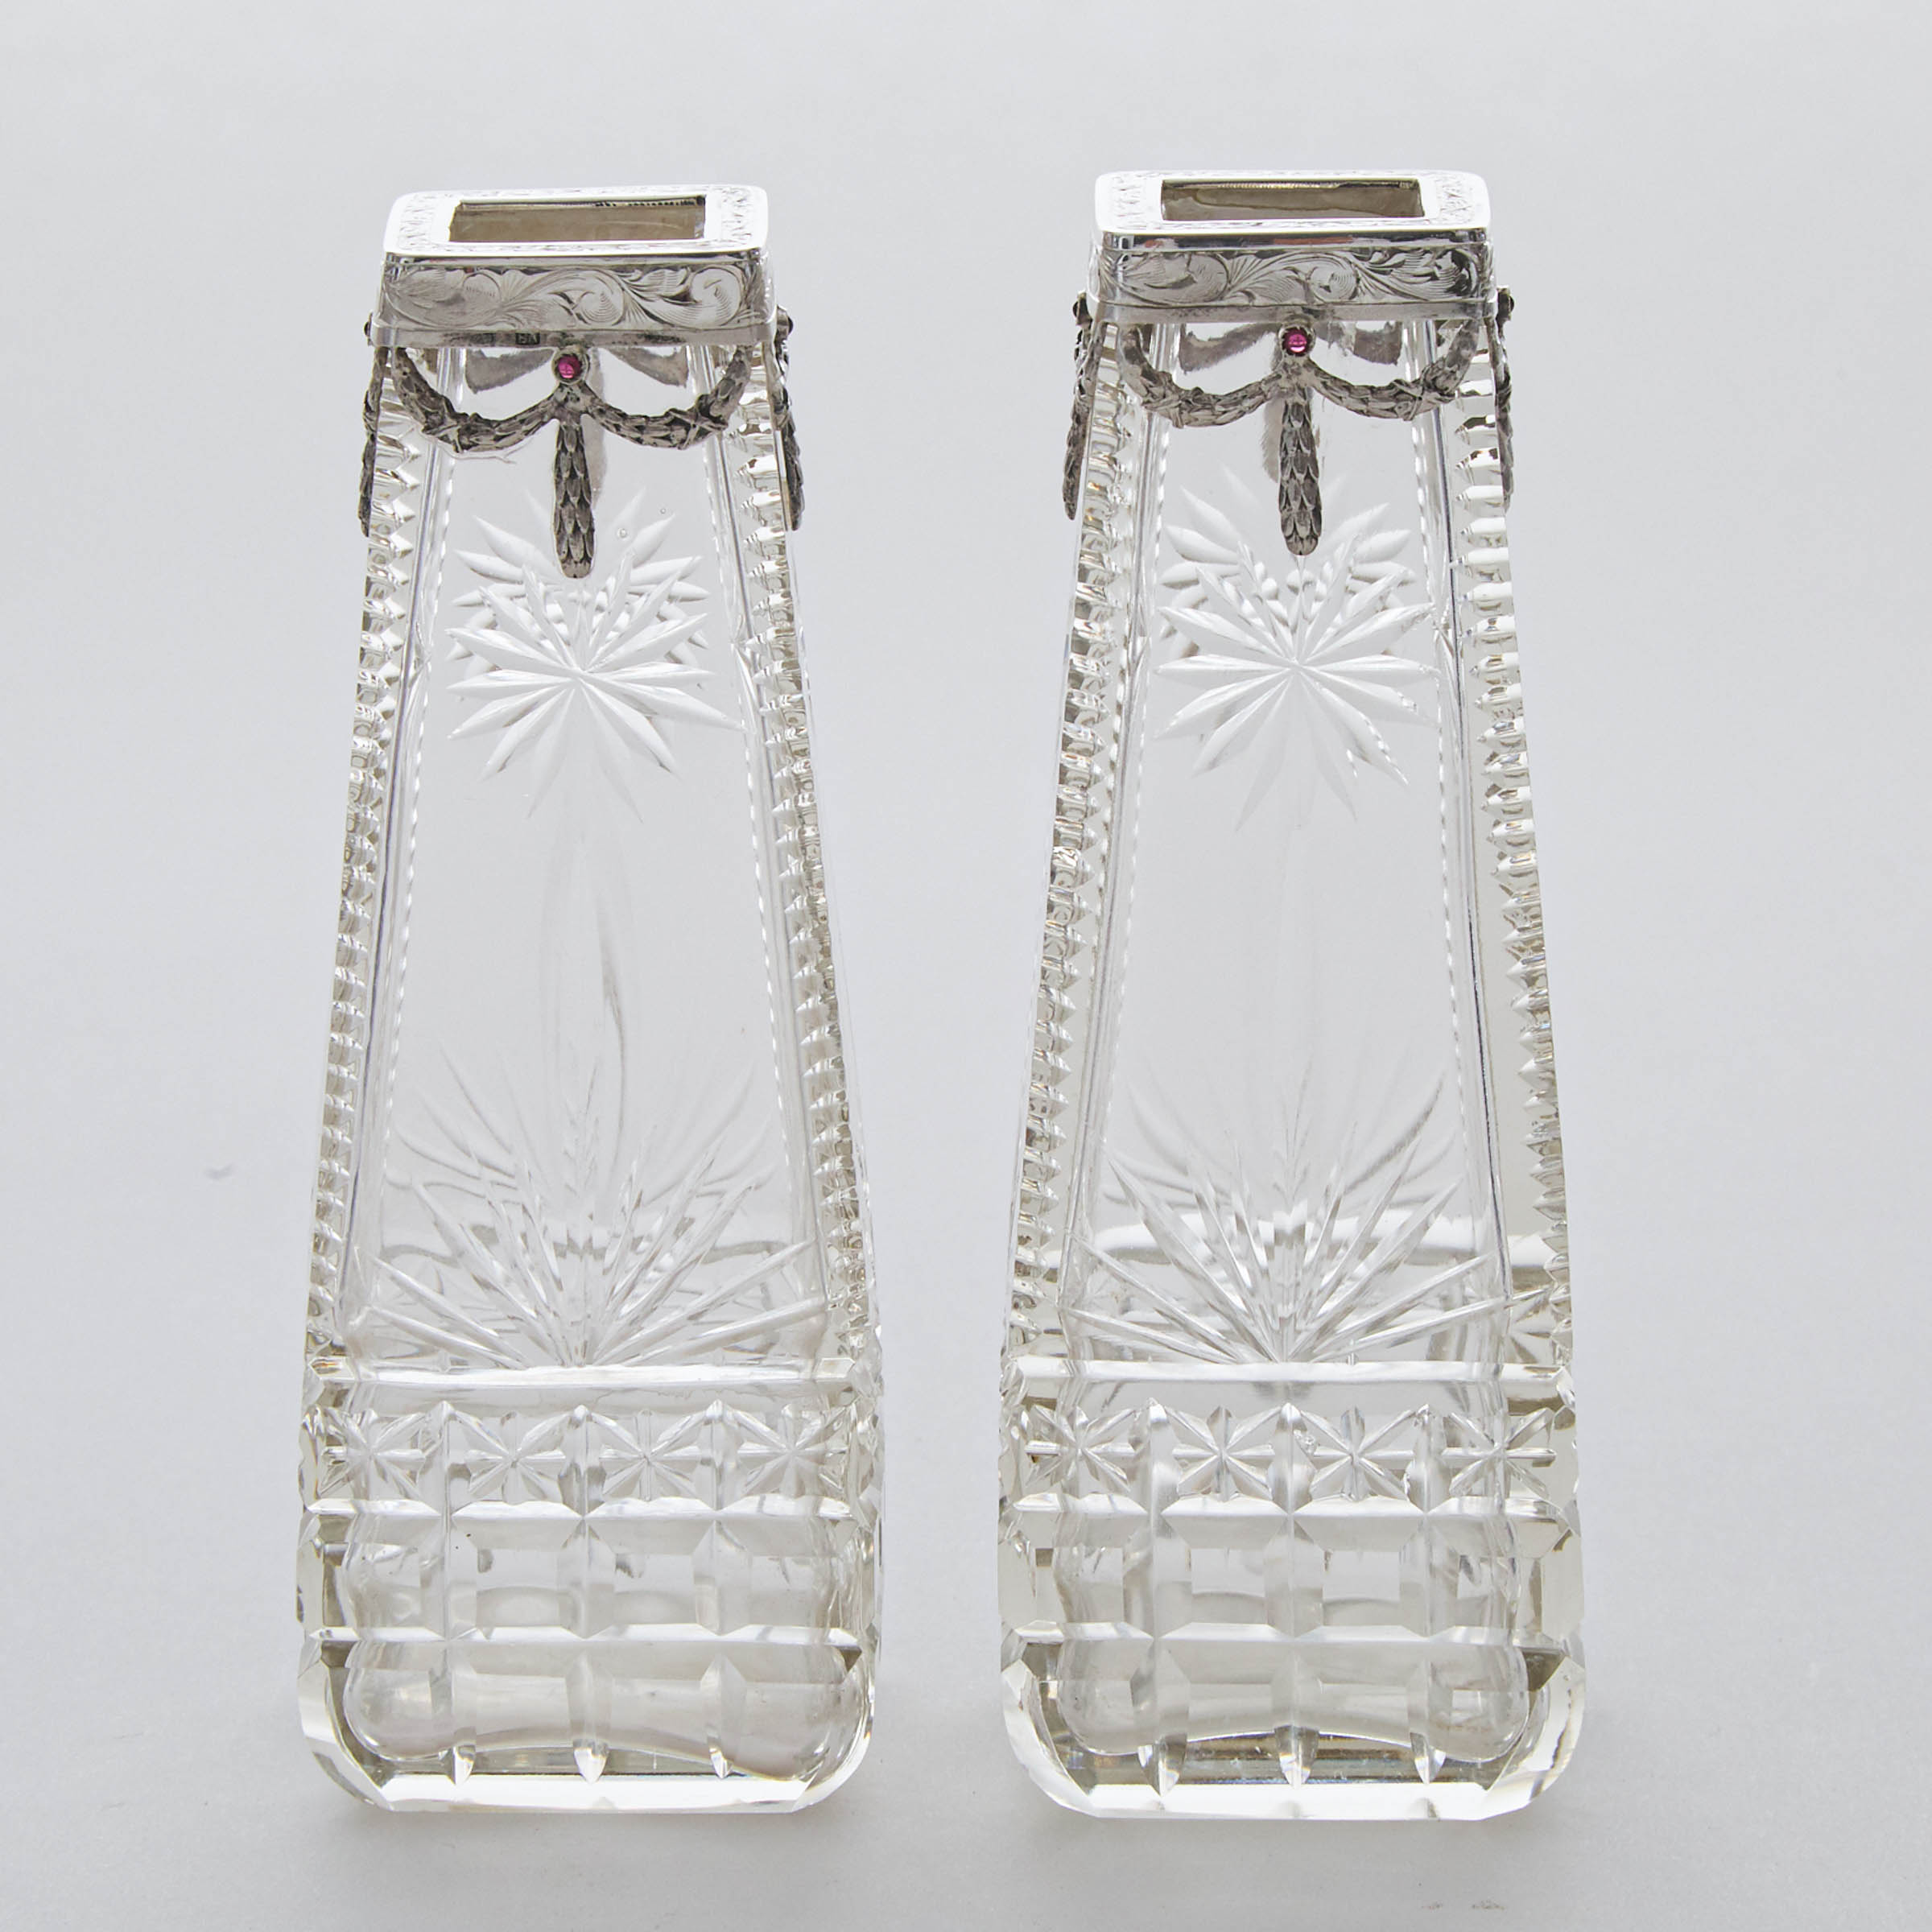 Pair of Silver Mounted Cut Glass Vases, probably Russian, 20th century